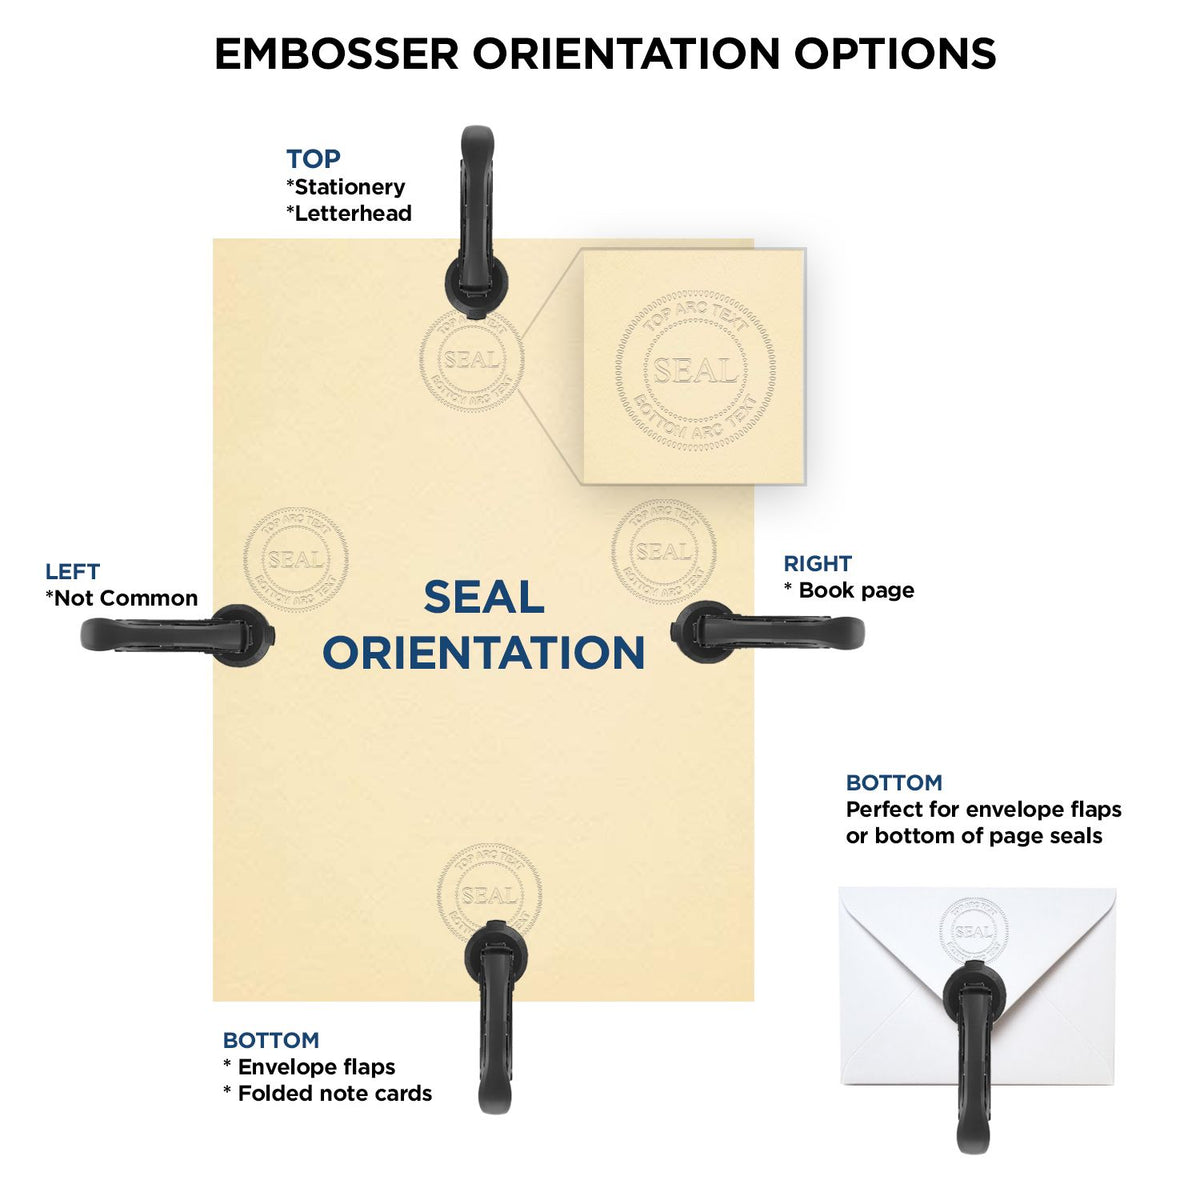 An infographic for the Heavy Duty Cast Iron Kansas Architect Embosser showing embosser orientation, this is showing examples of a top, bottom, right and left insert.